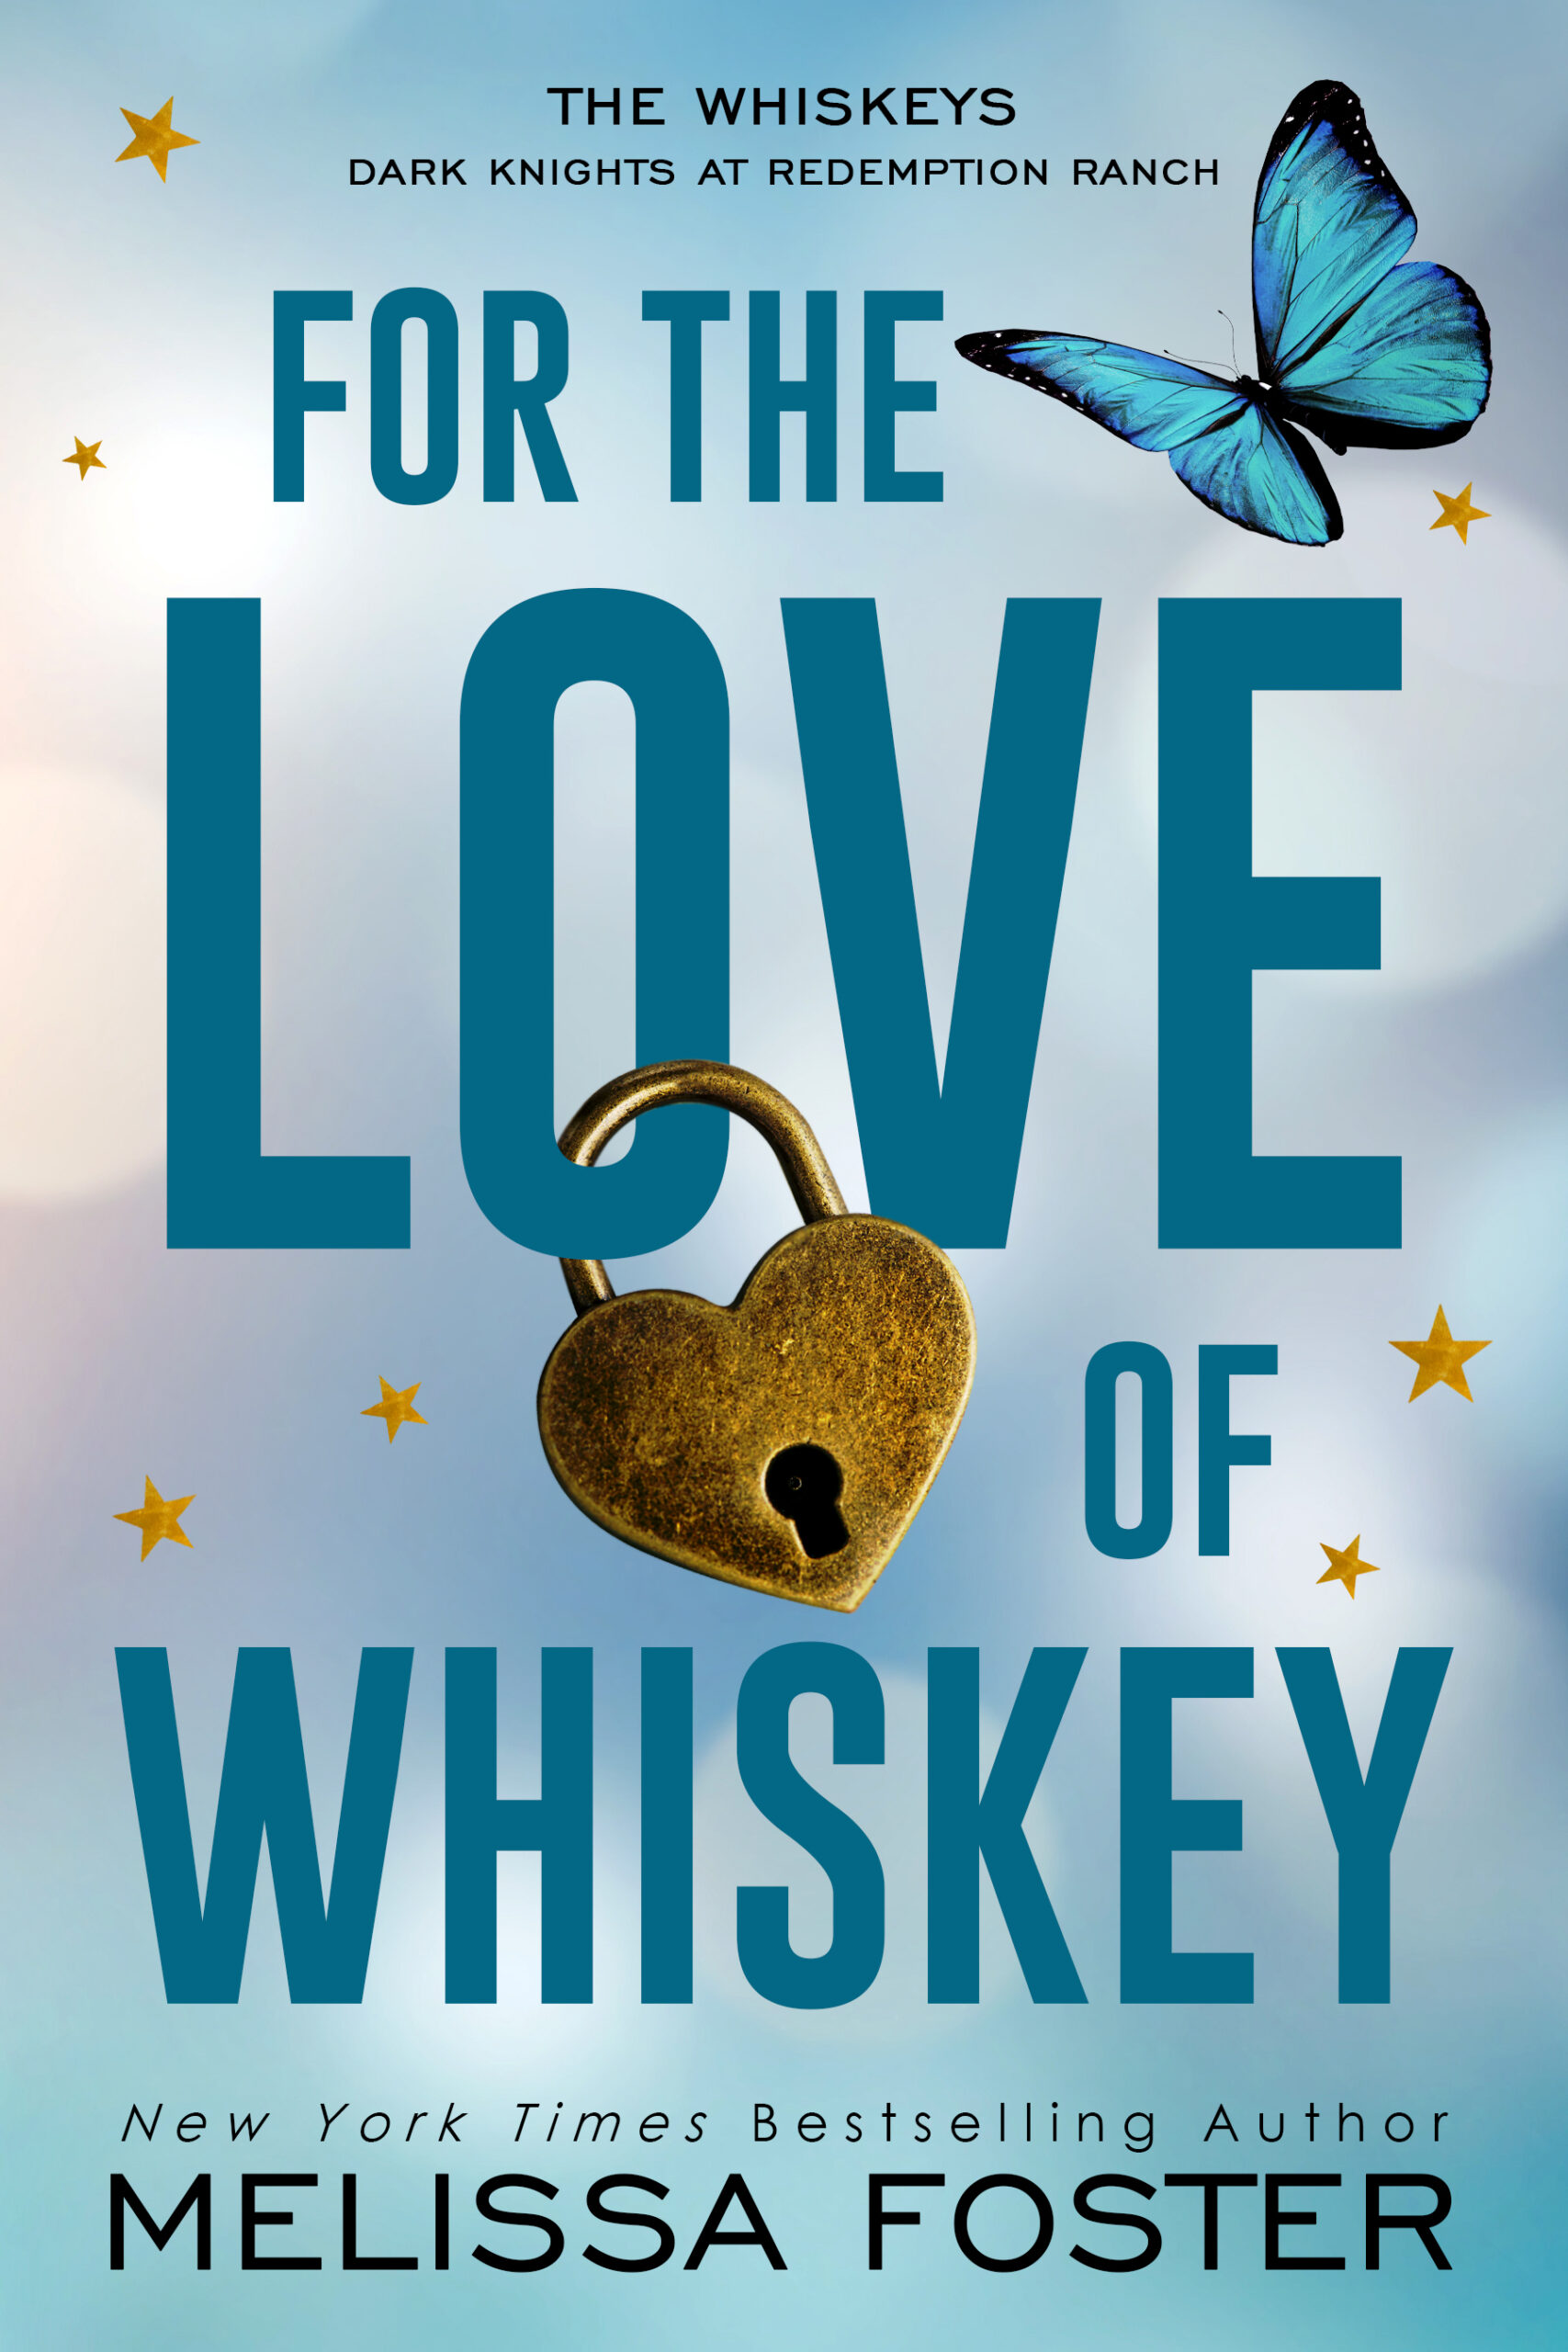 For the Love of Whiskey Special Edition paperback from Melissa Foster